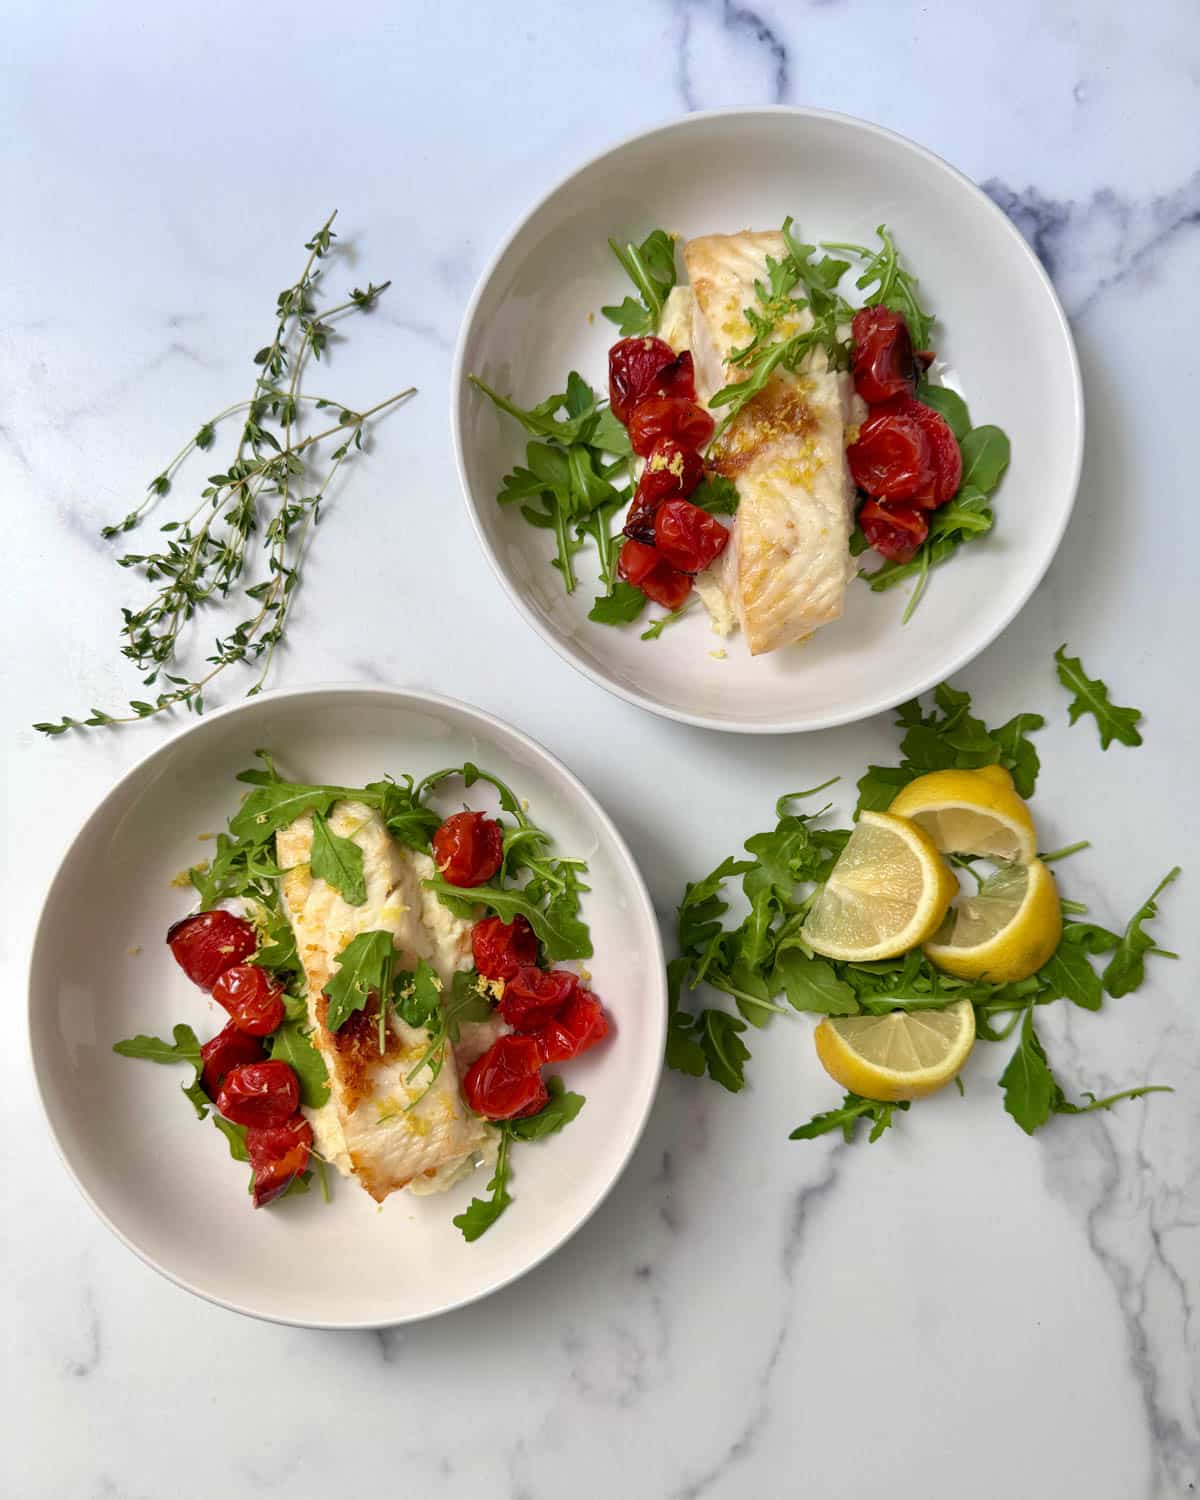 Pan seared fish in white bowls over mashed parsnips with roasted cherry tomatoes and arugula with arugula and lemon slices to the side.